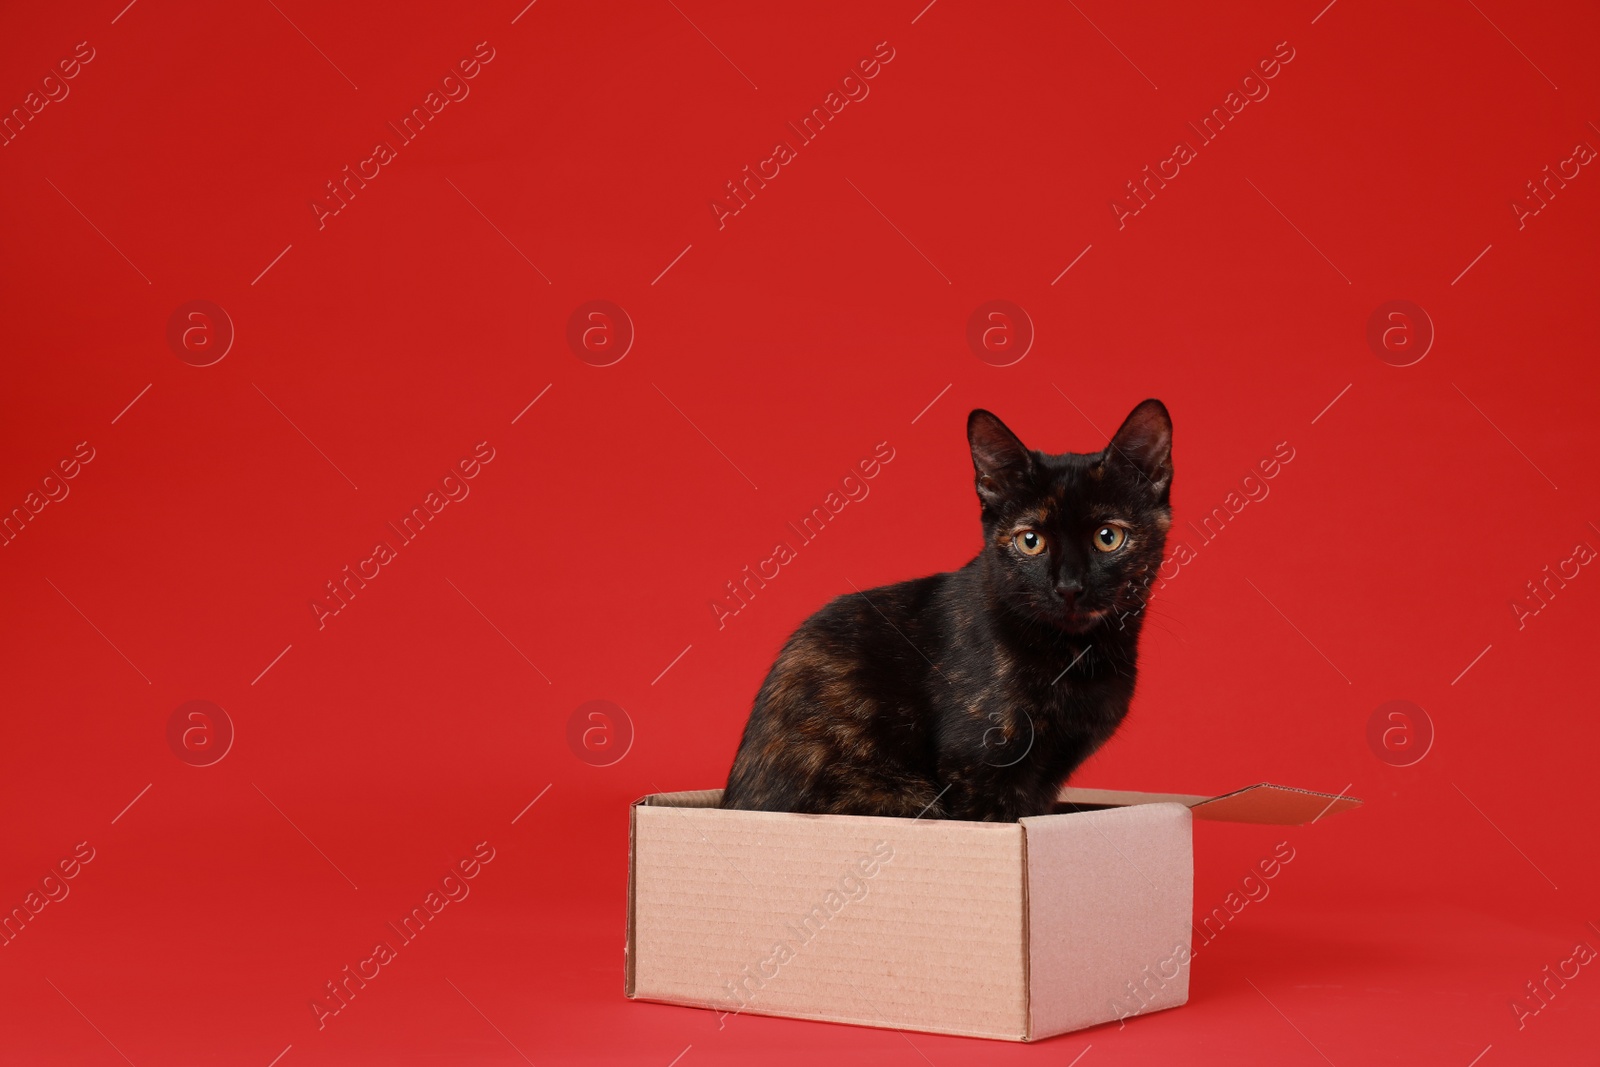 Photo of Cute black cat sitting in cardboard box on red background